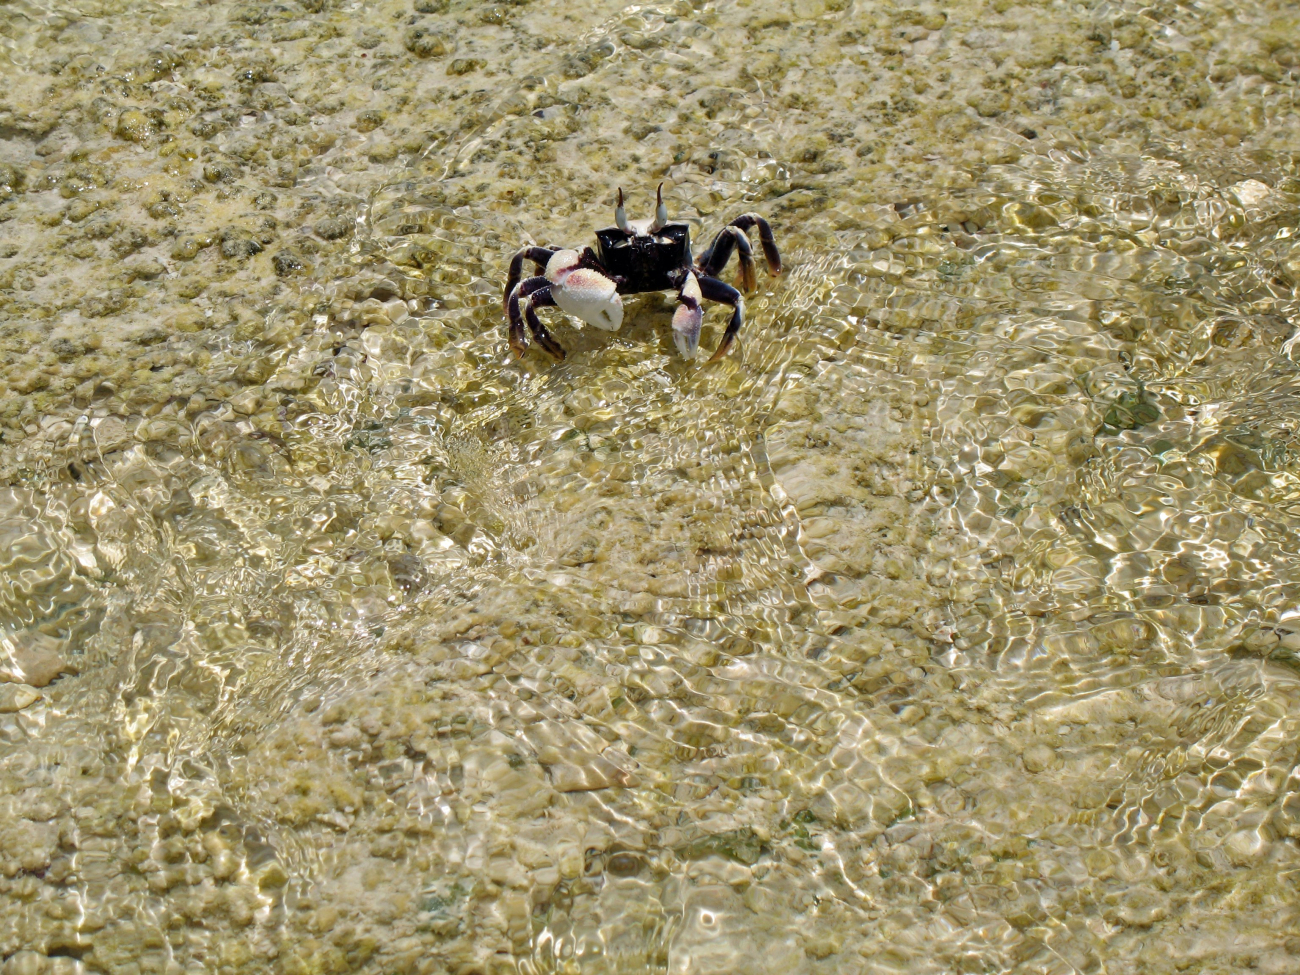 A crab in the shallows of Swains Island